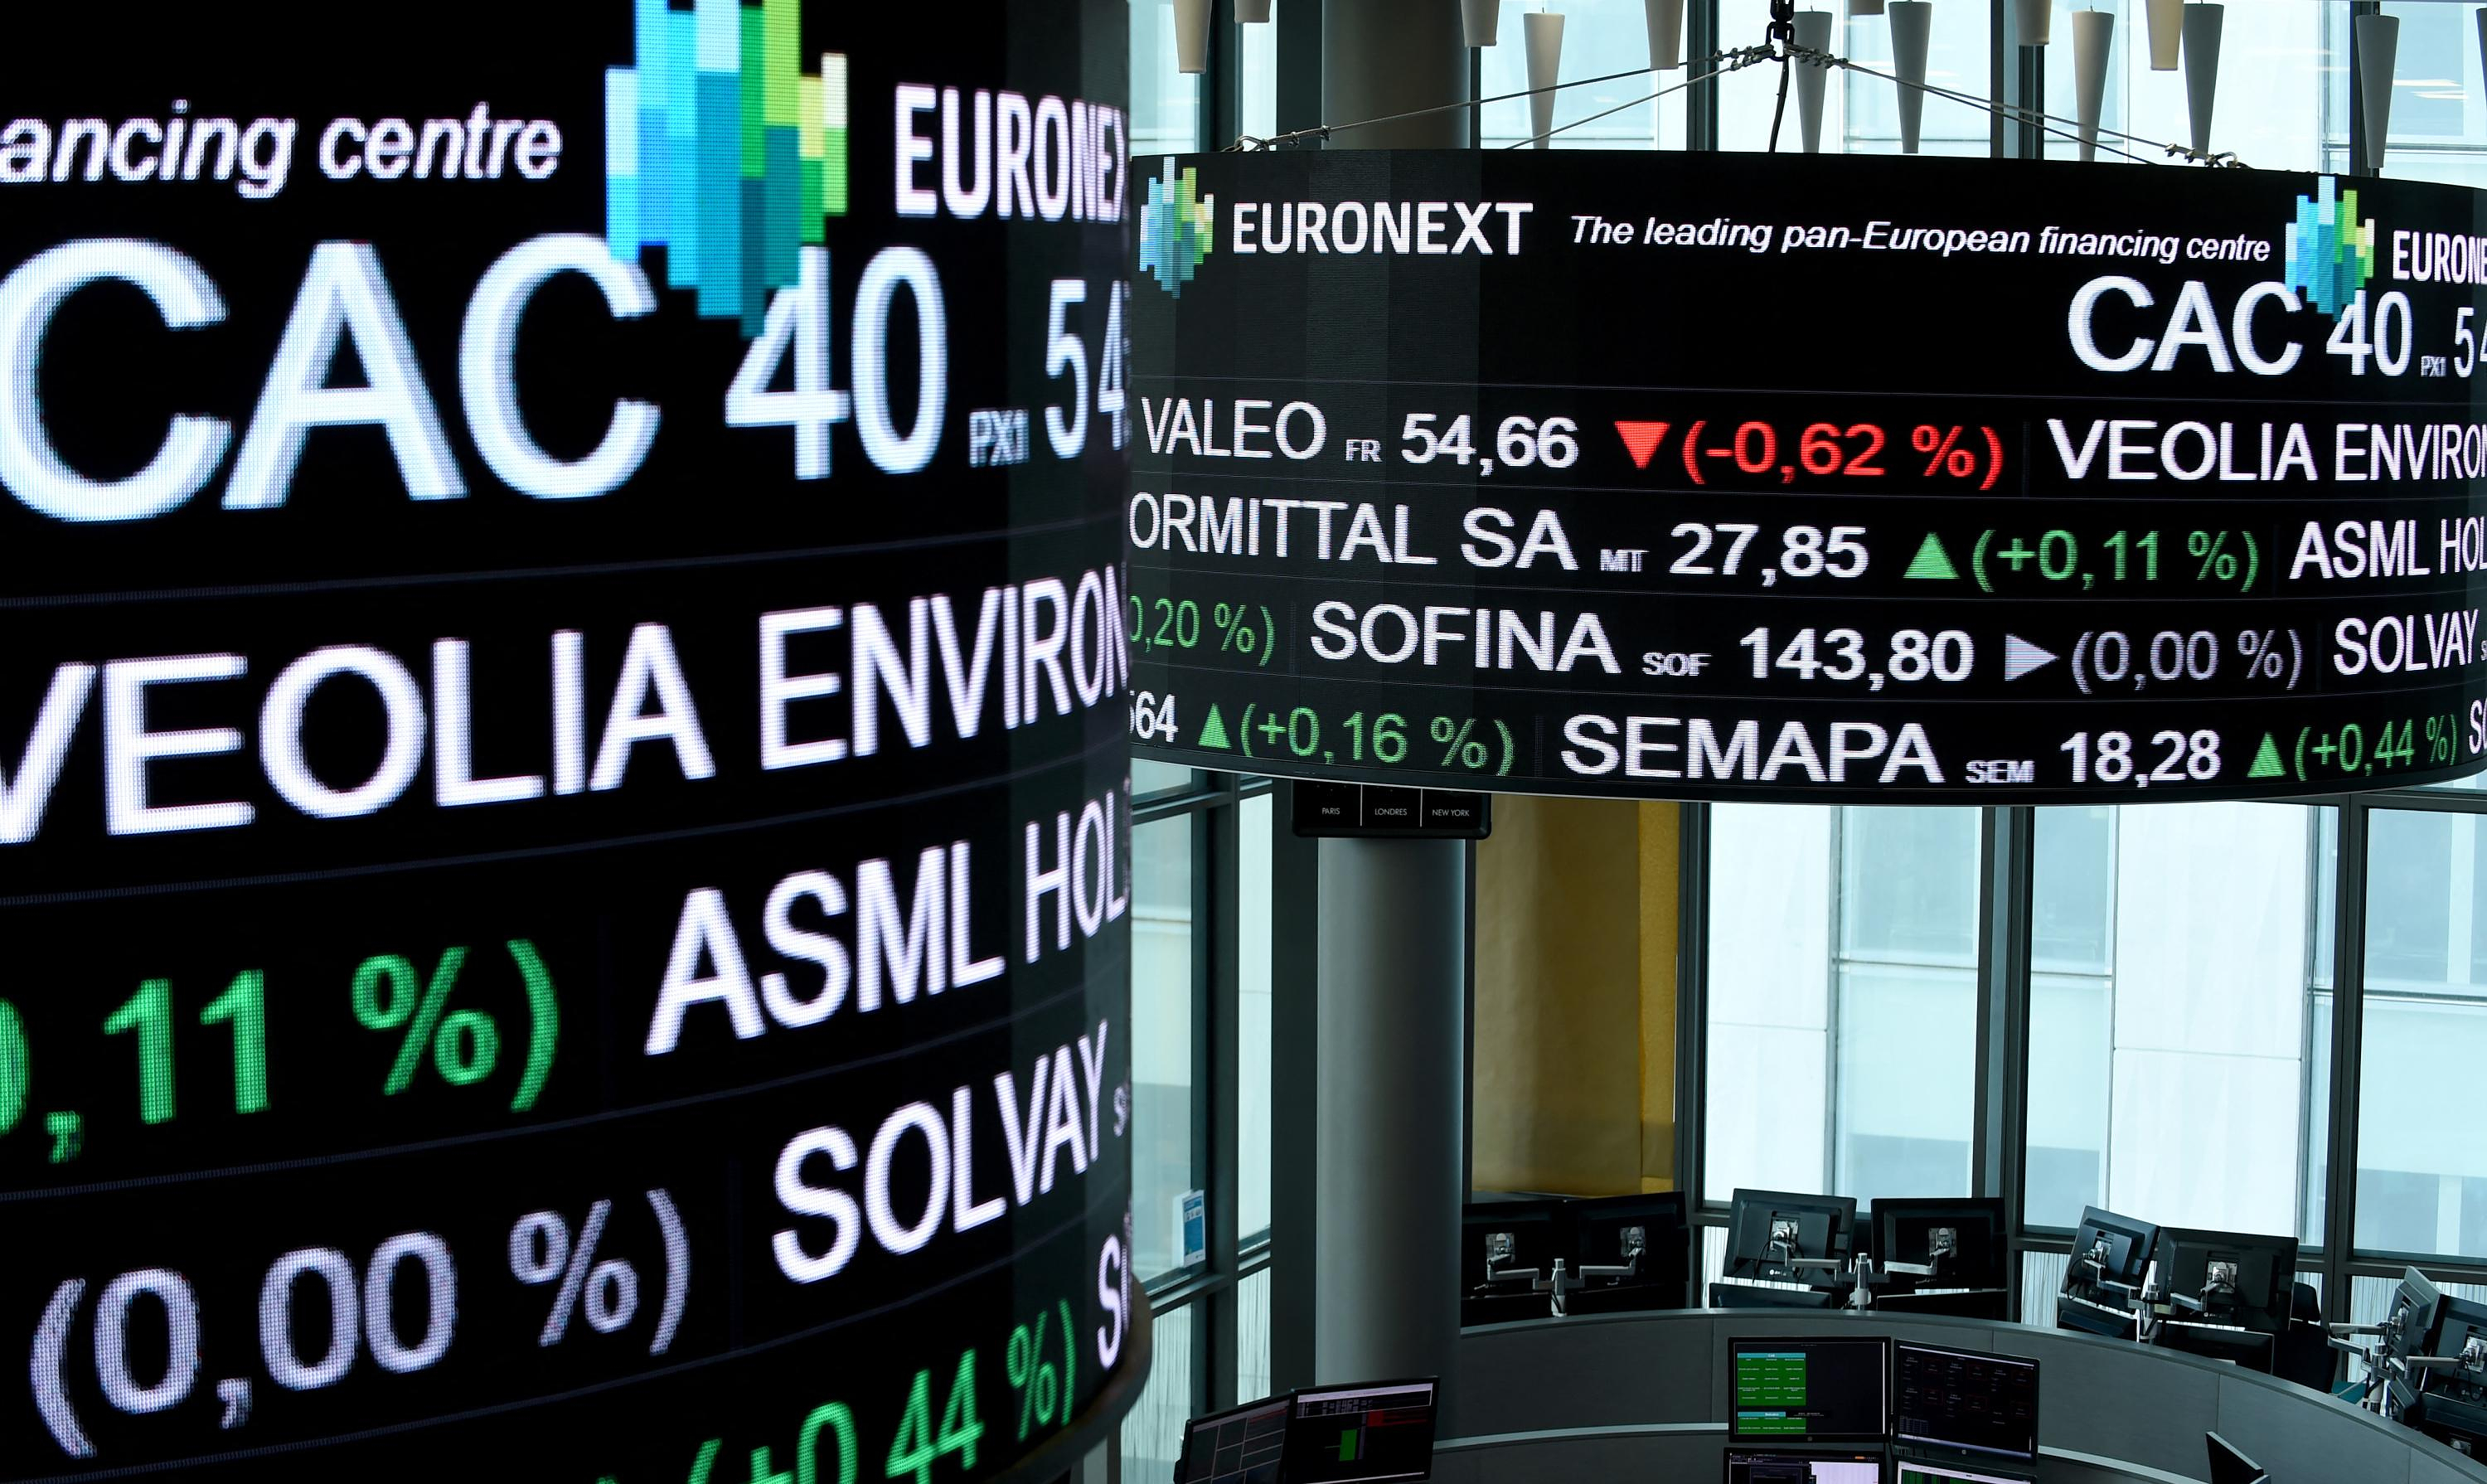 Stock market: after record results, the CAC 40 is on the verge of exceeding the symbolic milestone of 8,000 points